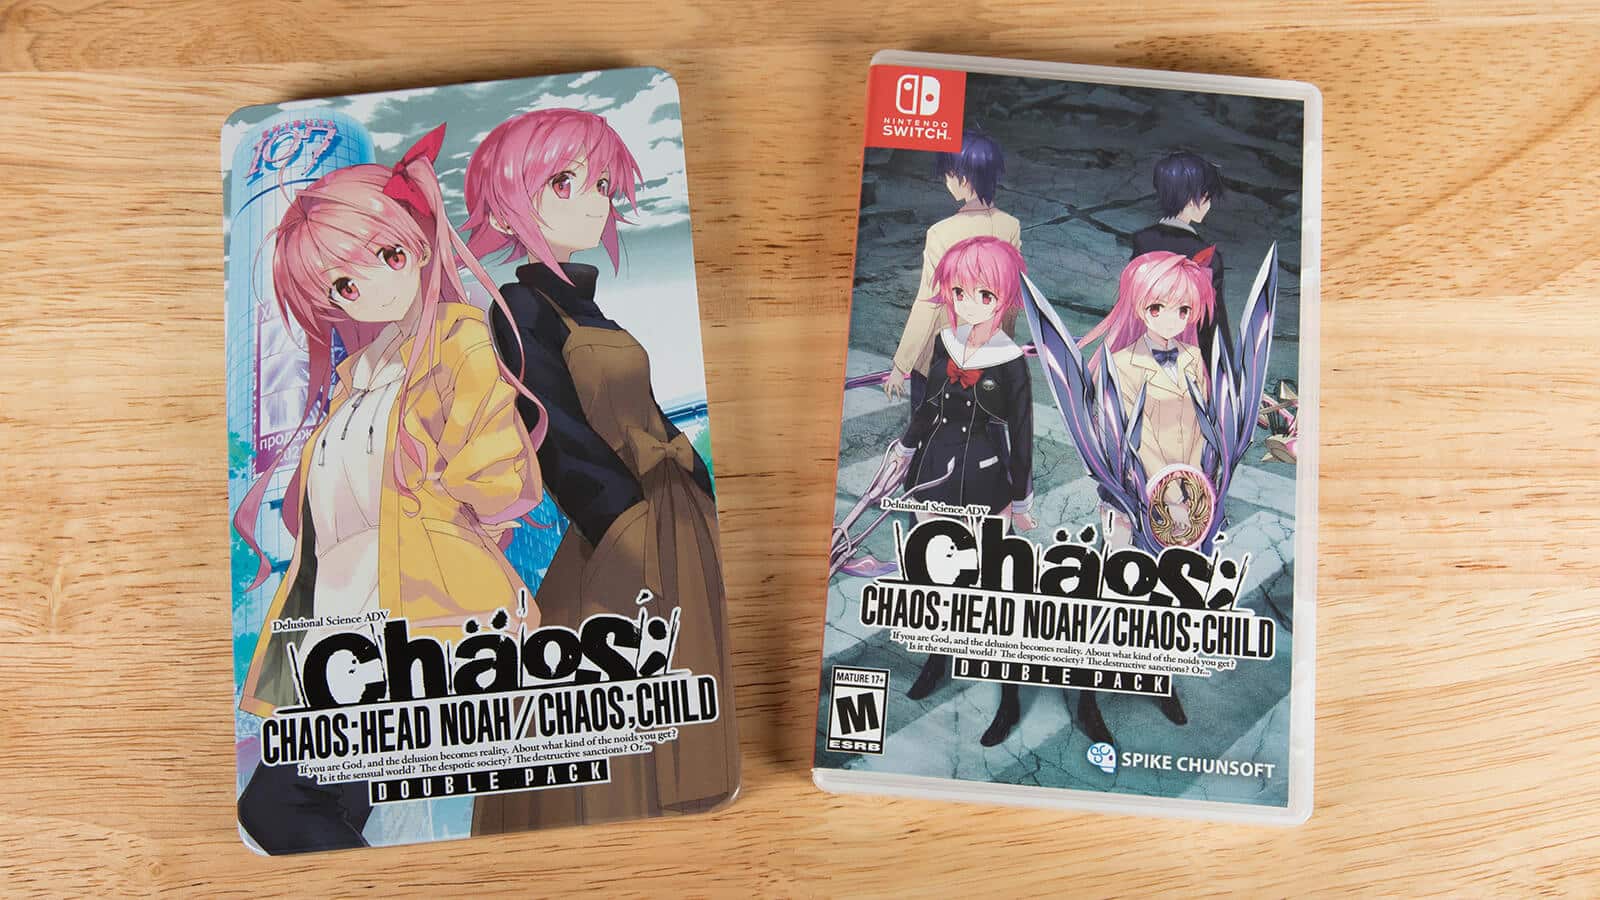 Chaos;Head Noah / Chaos;Child Double Pack Steelbook Launch Edition - Nintendo Switch